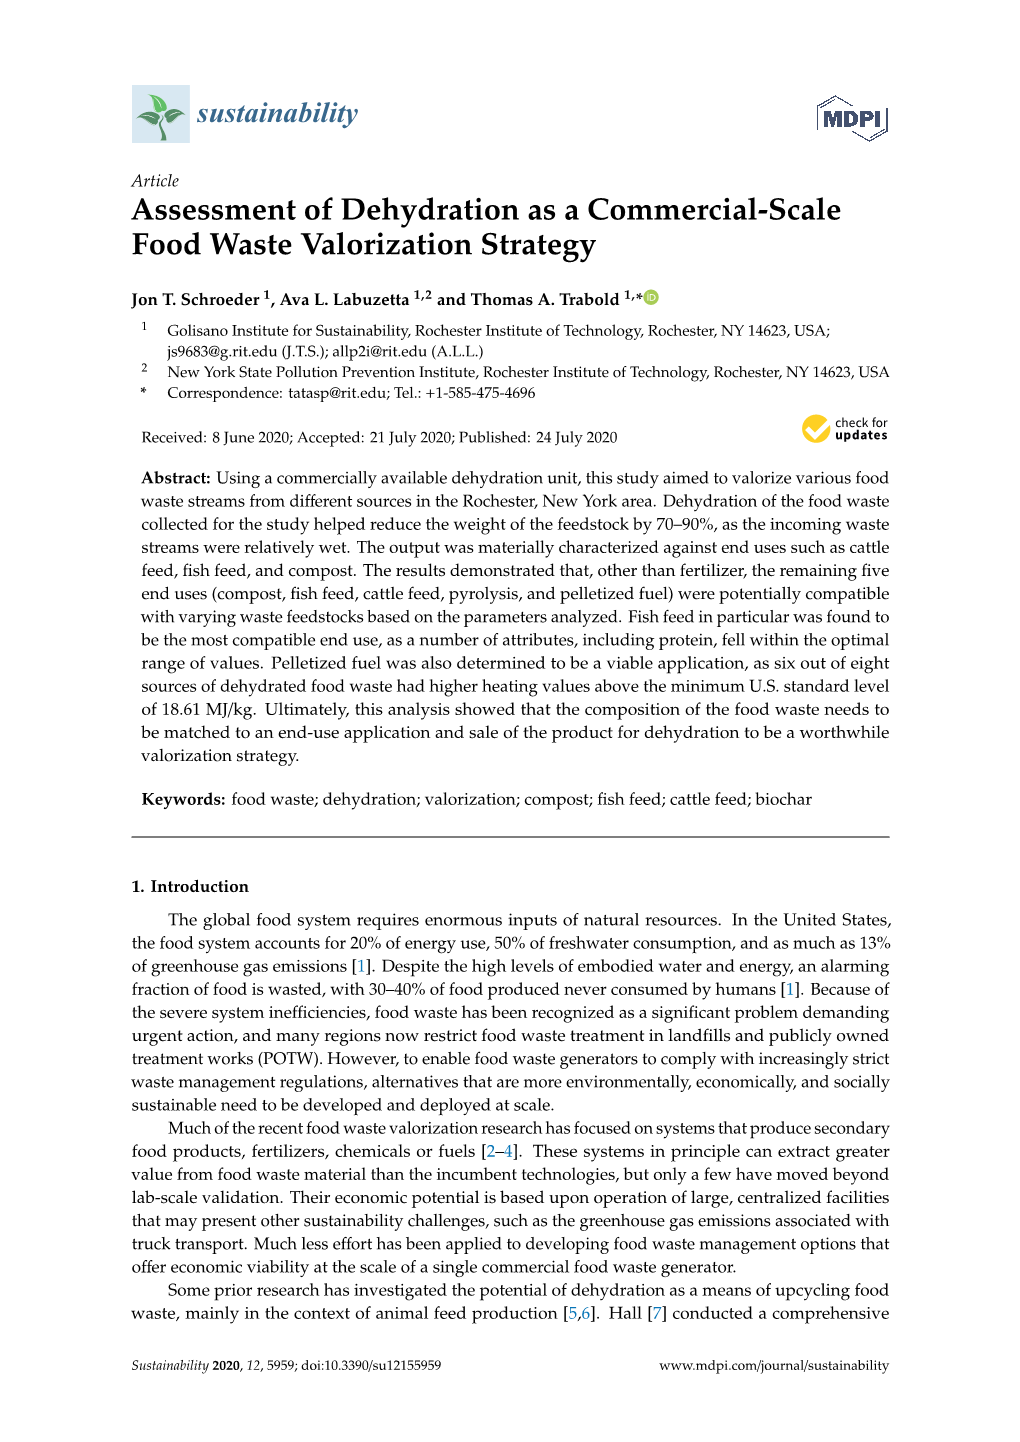 Assessment of Dehydration As a Commercial-Scale Food Waste Valorization Strategy